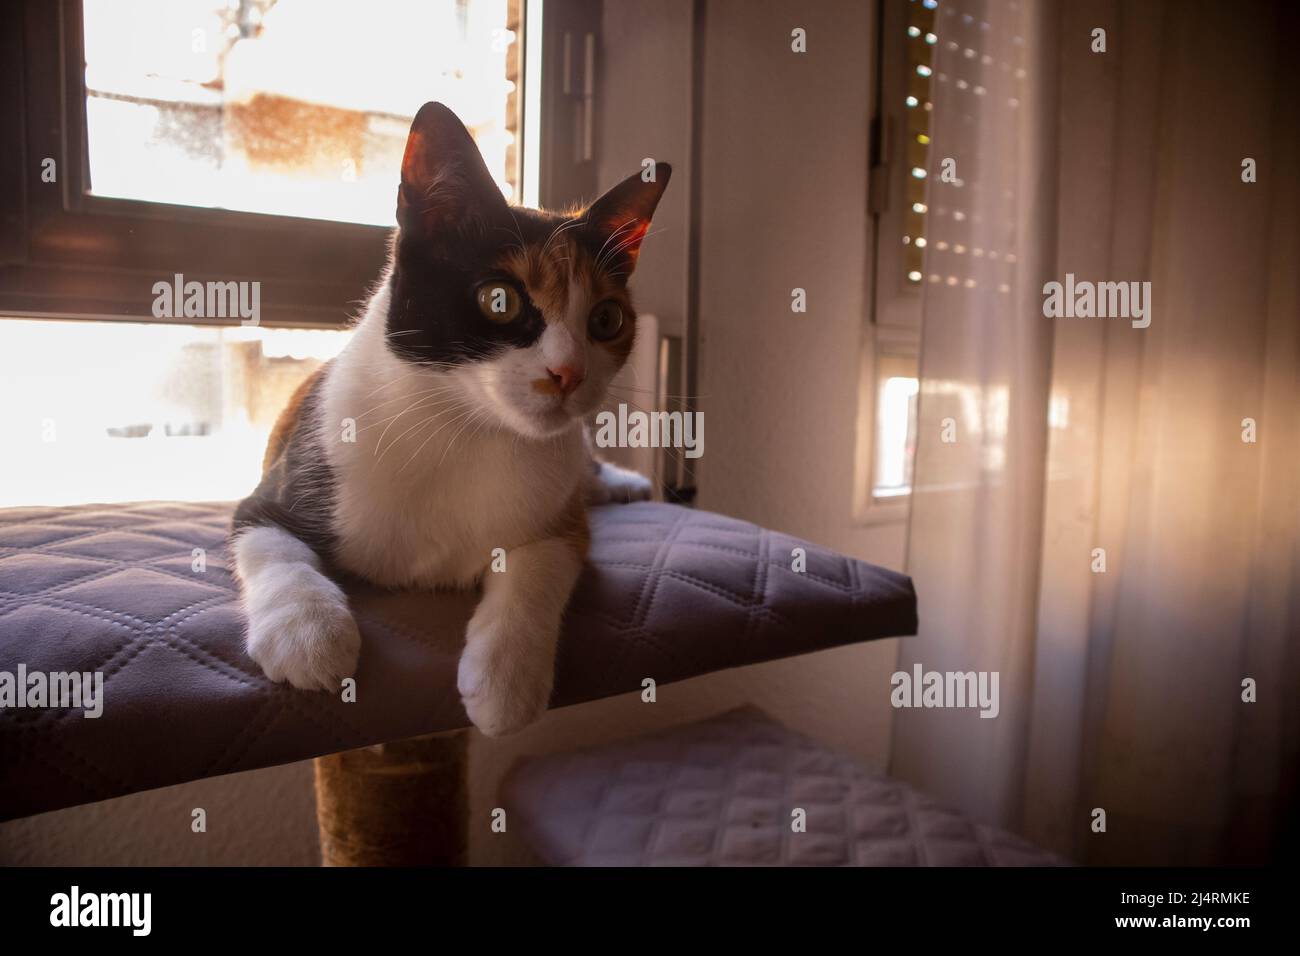 The cat lies down at home in front of the window The warm light of the sun enters the room from outside. Stock Photo